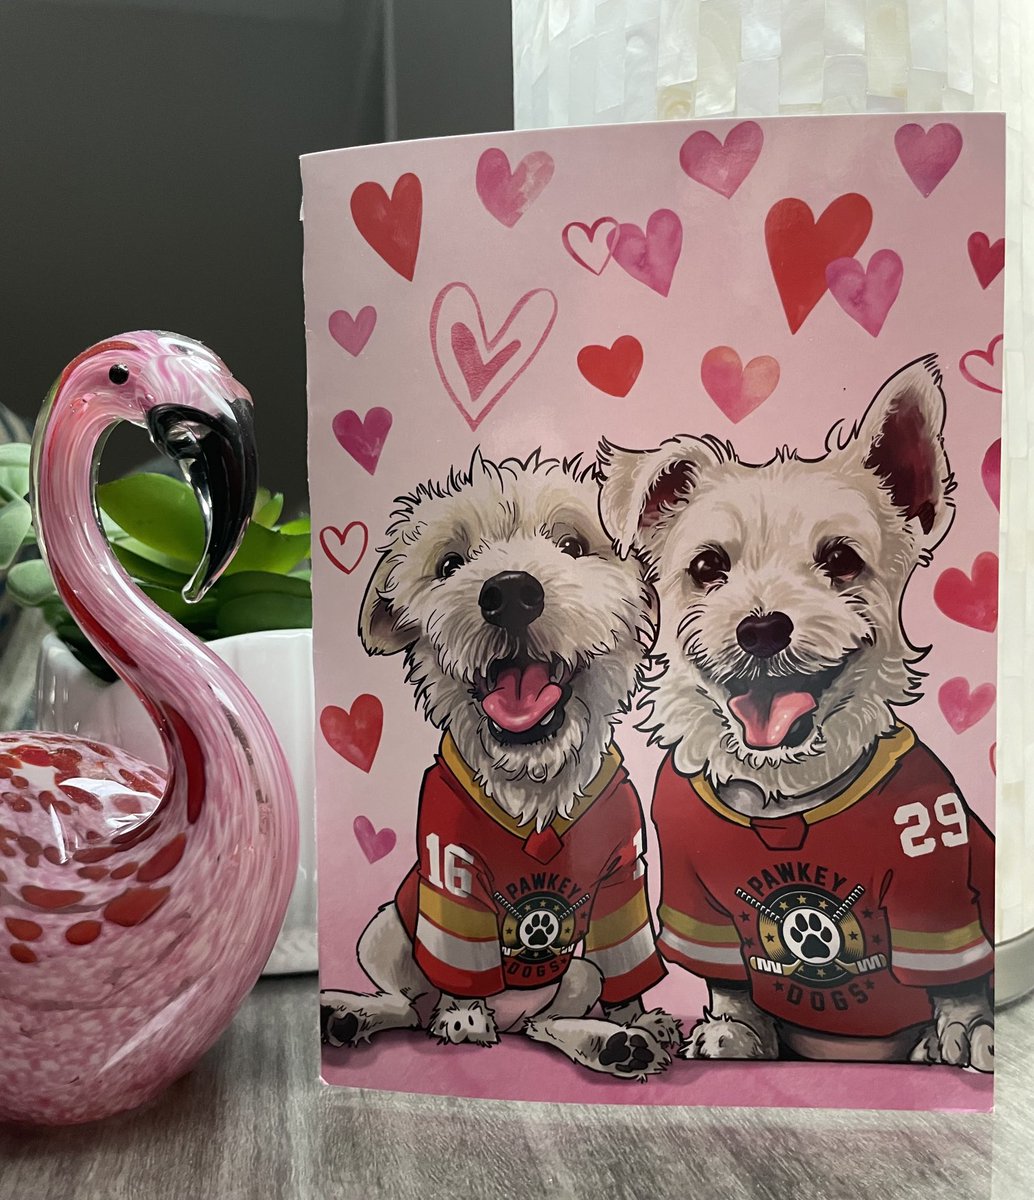 My two favorite guys sent me a Valentine💖 Love y’all and the #PawYouNeedIsLove family. #AStrongerFamilyTogether ⁦@BarkAndreFurry⁩ ⁦@DekeHenriFurry⁩